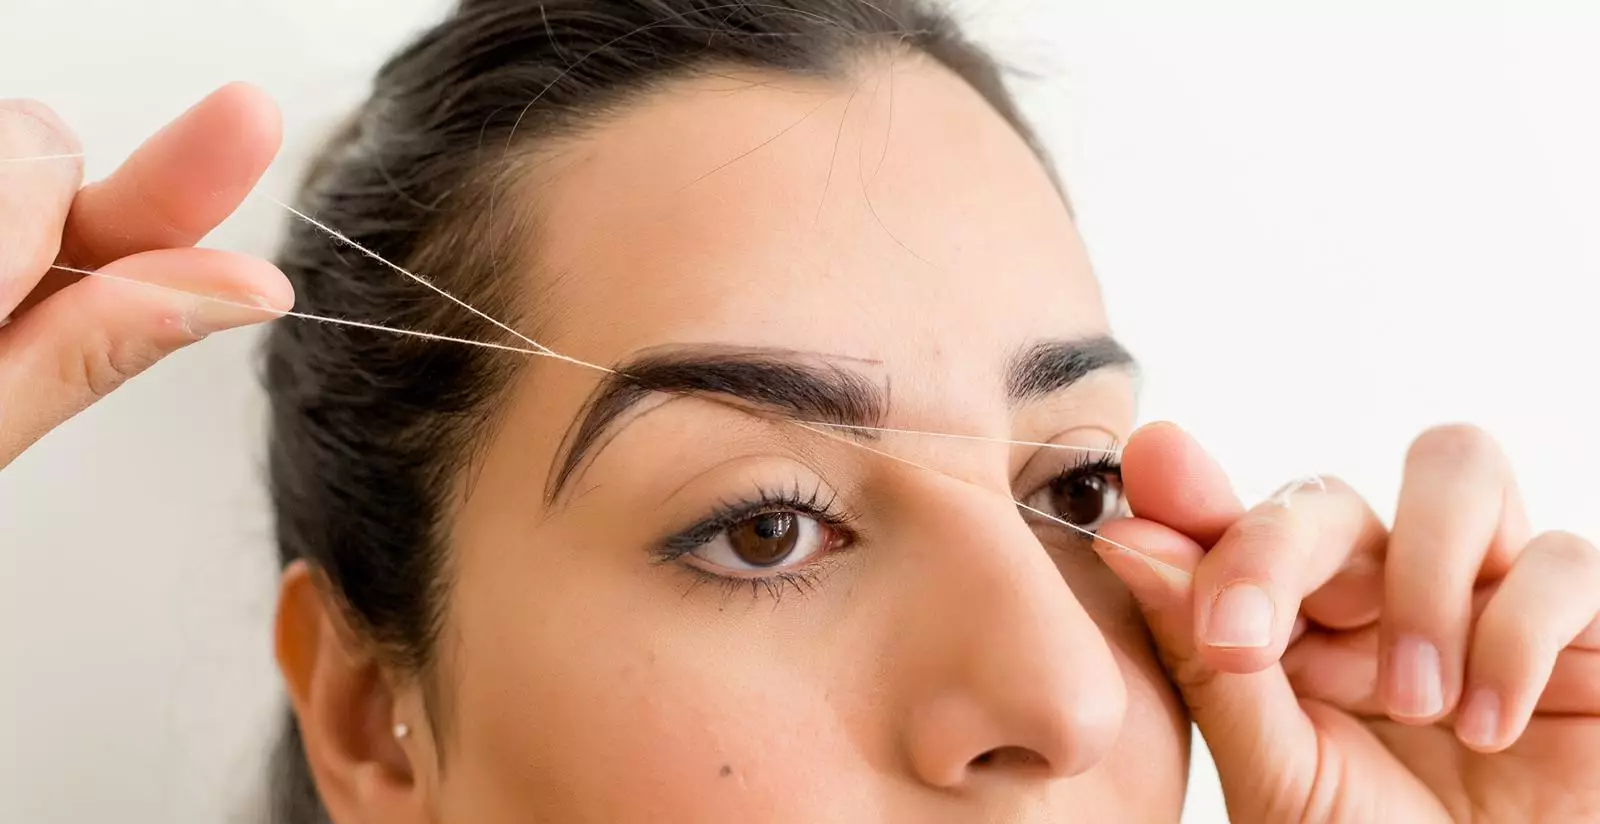 Do subtle, minimal tidying under the brows, above the eyelids and your brow tails. Don't overdo it! (